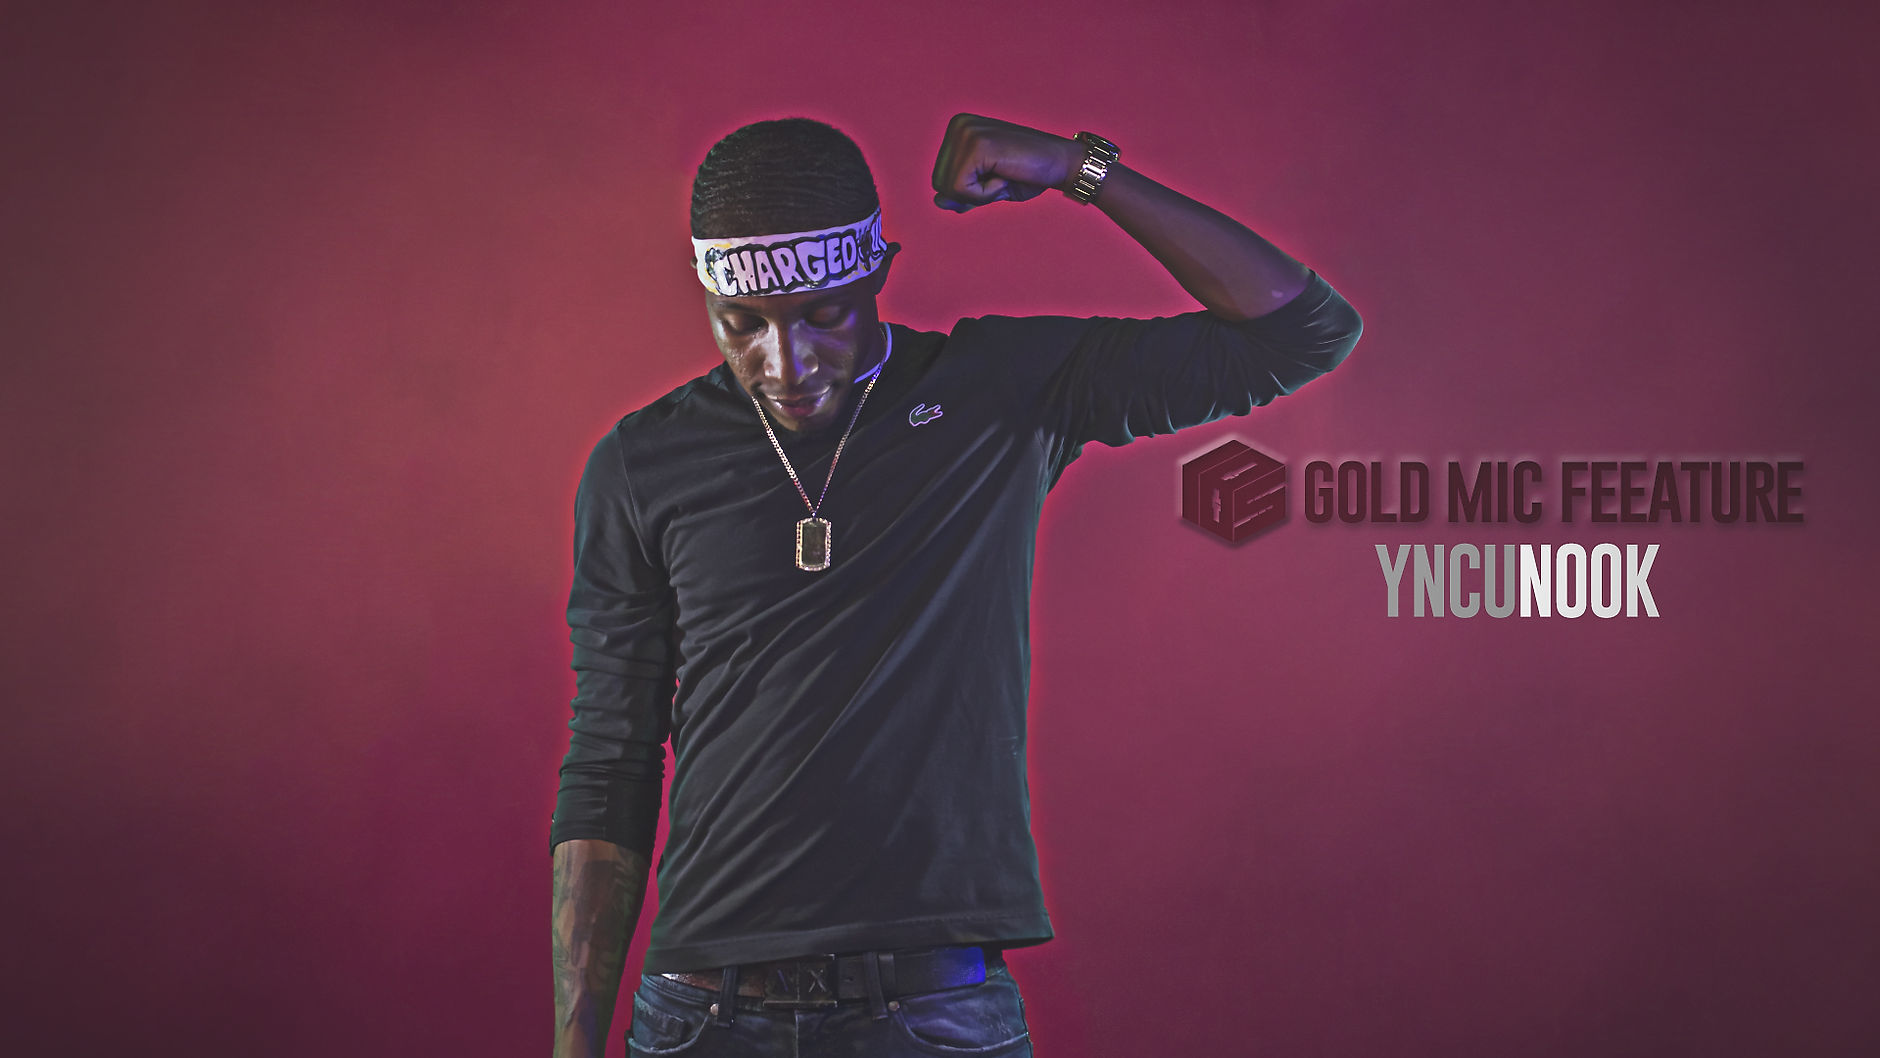 #GMF (Gold Mic Feature)